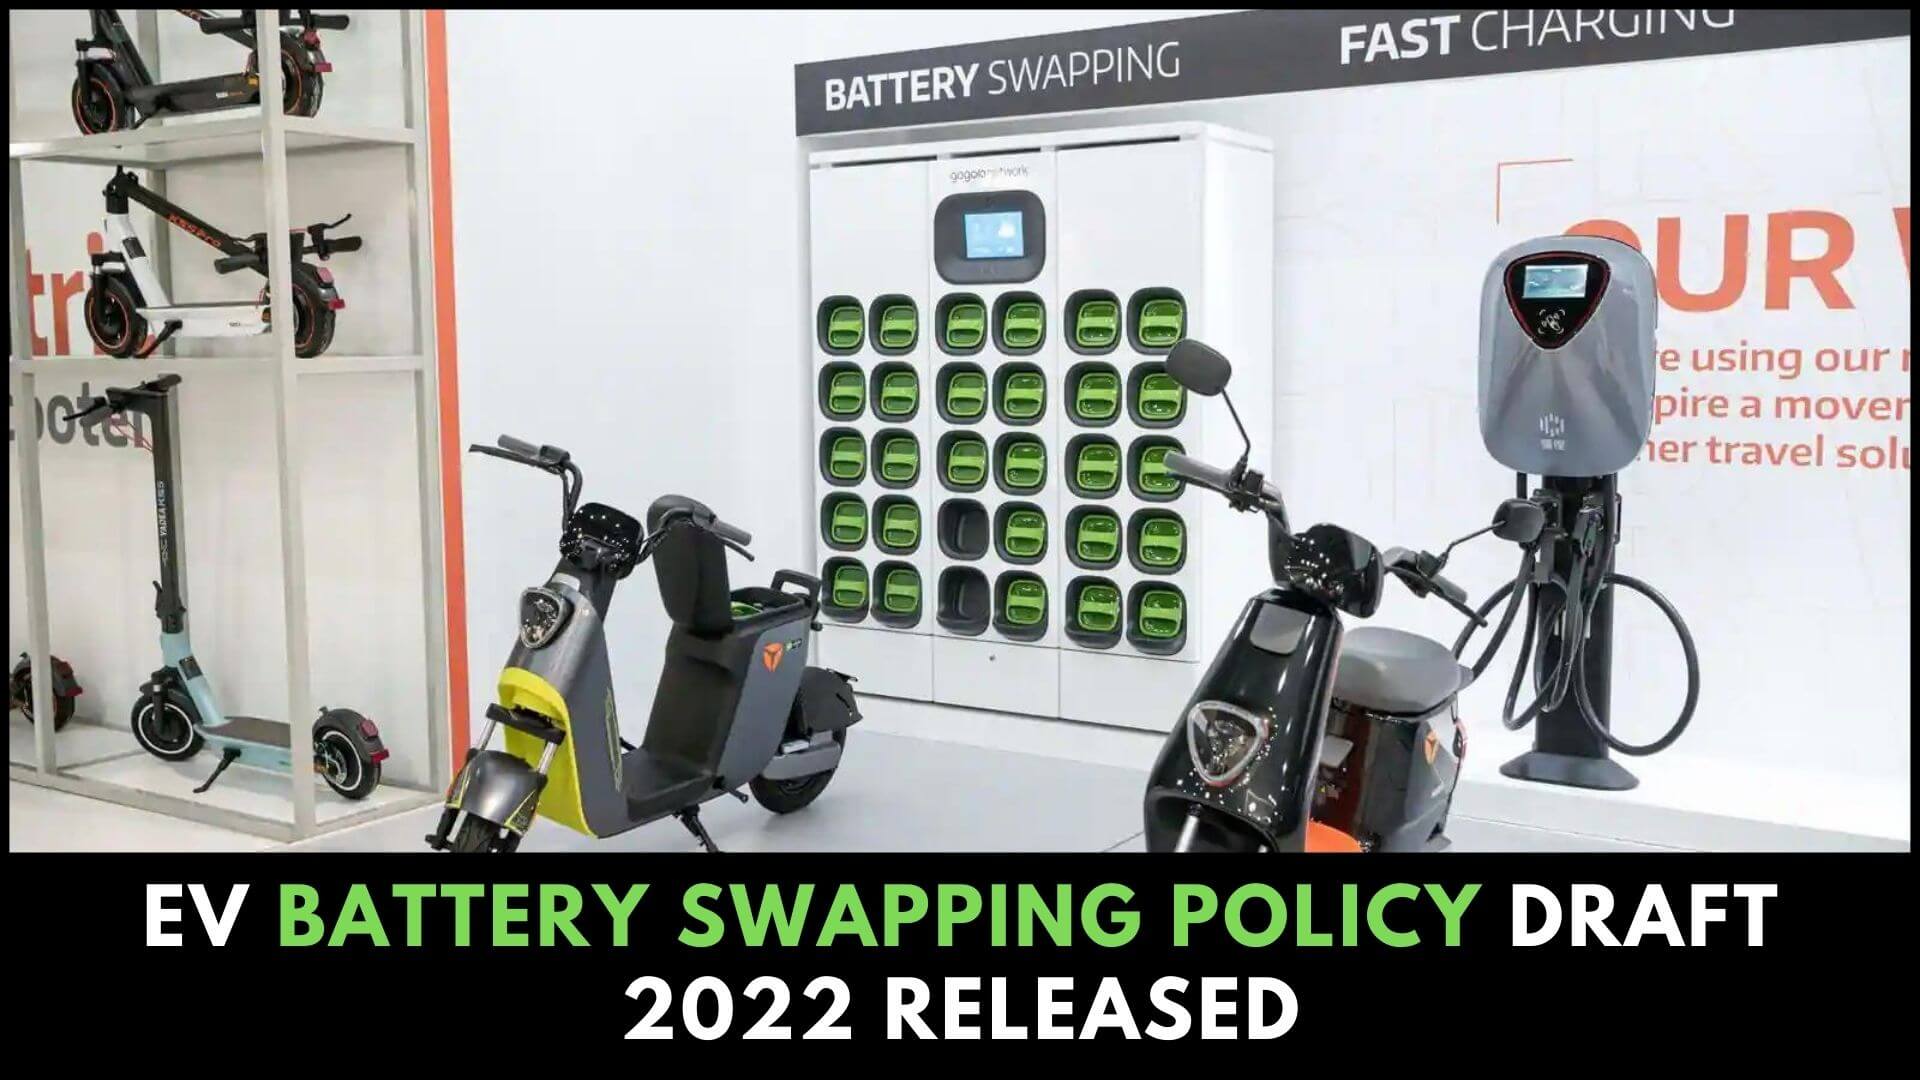 https://e-vehicleinfo.com/ev-battery-swapping-policy-draft-2022-released/